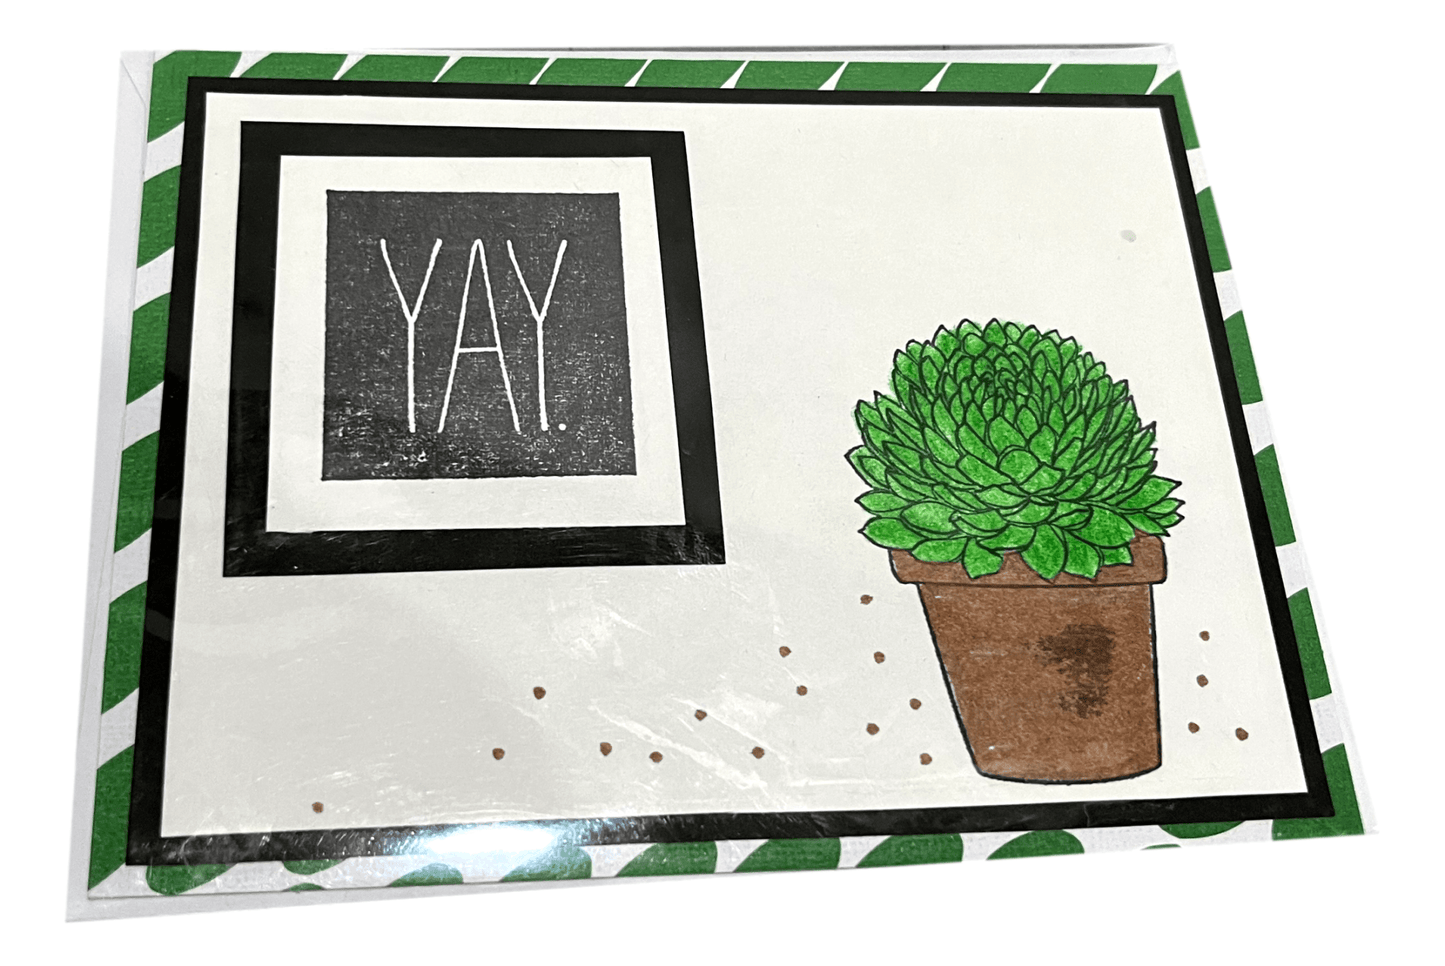 Note Card Miscellaneous Yay Plant Handcrafted by Local Artist 5.75 L x 4.5 W inches - Ysleta Mission Gift Shop- VOTED El Paso's Best Gift Shop